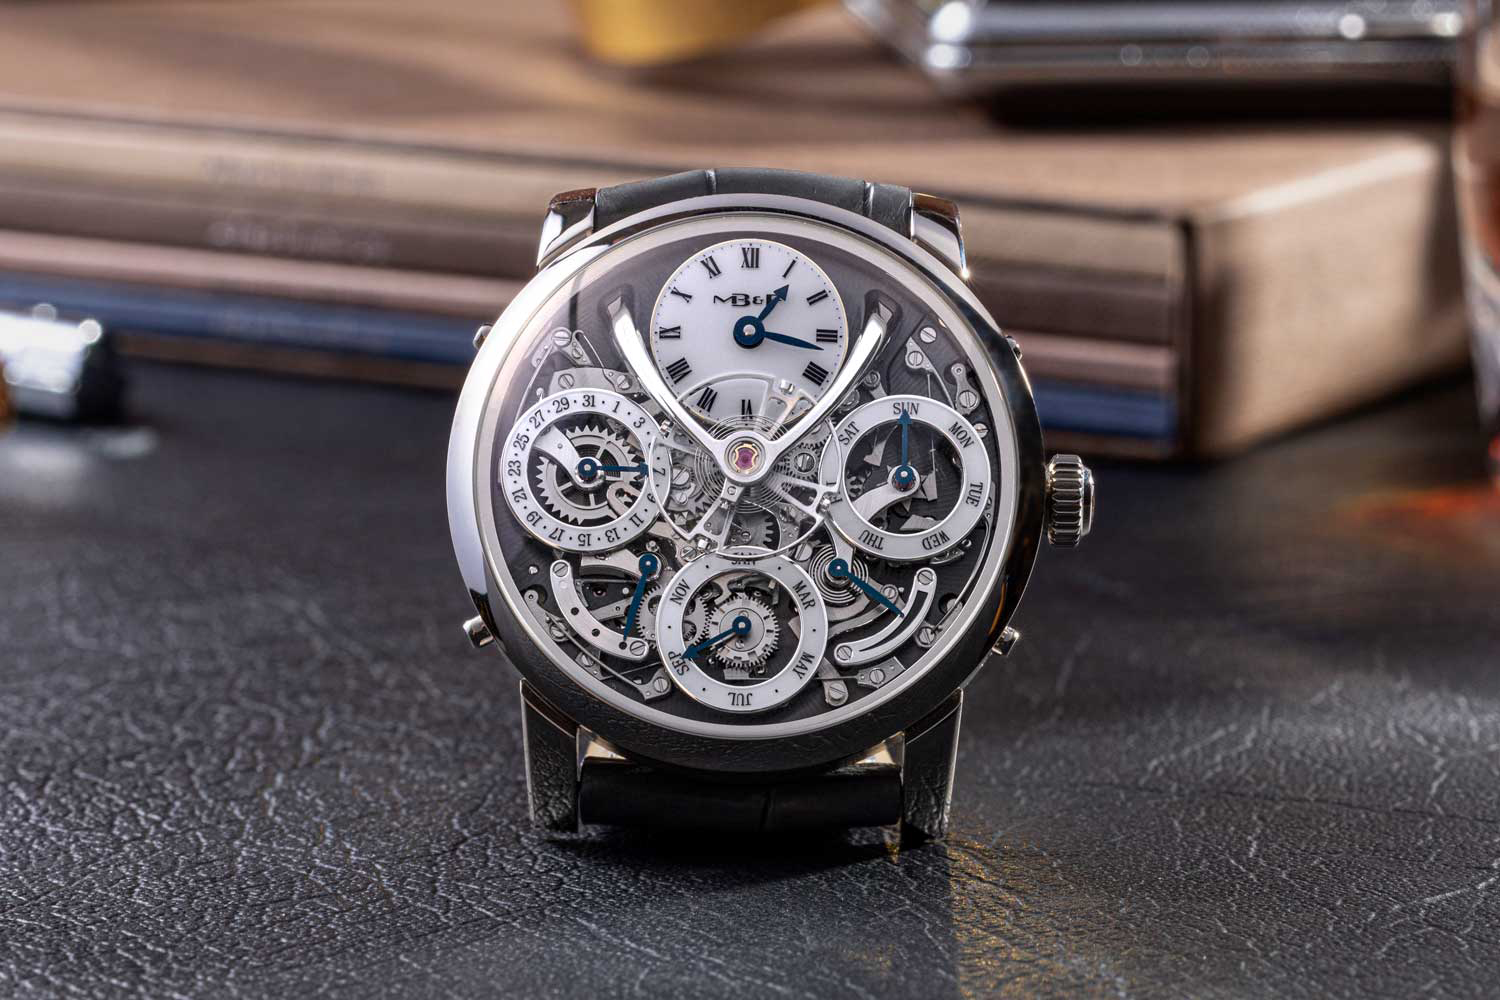 Max Büsser’s LM Perpetual Calendar created with Stephen McDonnell is one of the most original and beautiful timepieces ever created and ranks up there with the Patek Philippe ref. 3448 as one of the icons in this category of complication. (©Revolution)